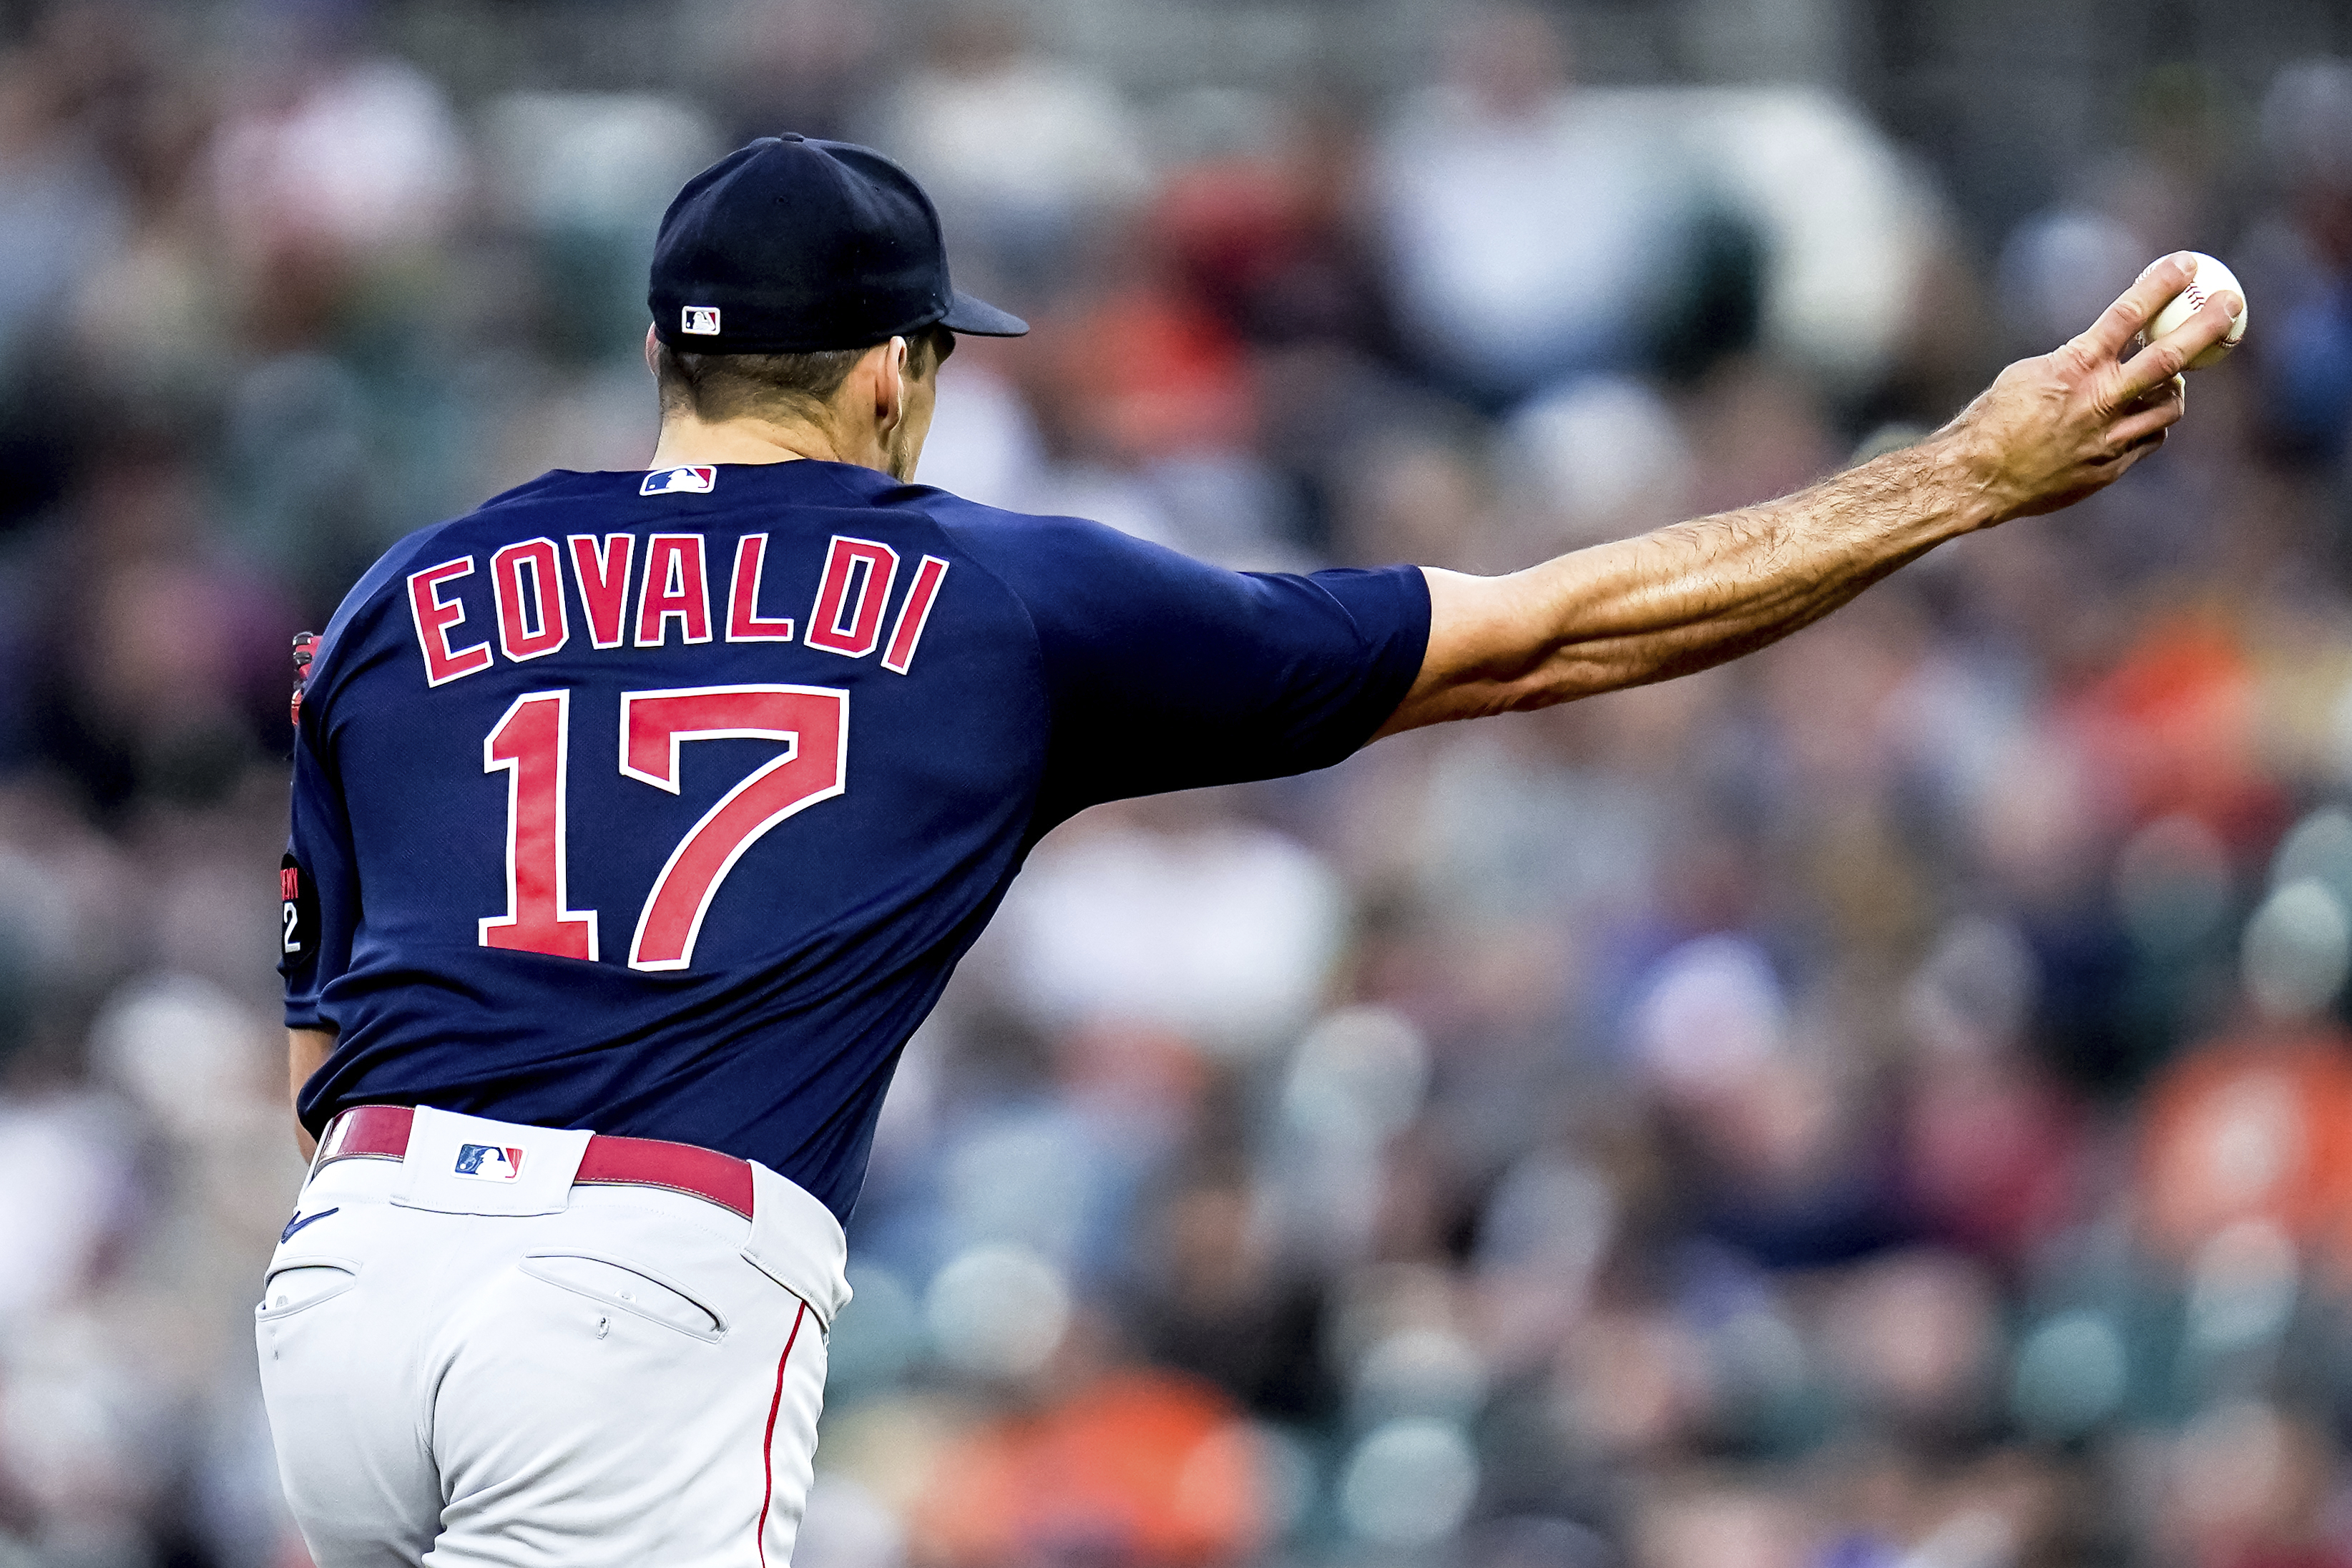 Mastrodonato: After Nathan Eovaldi's departure, 2023 Red Sox